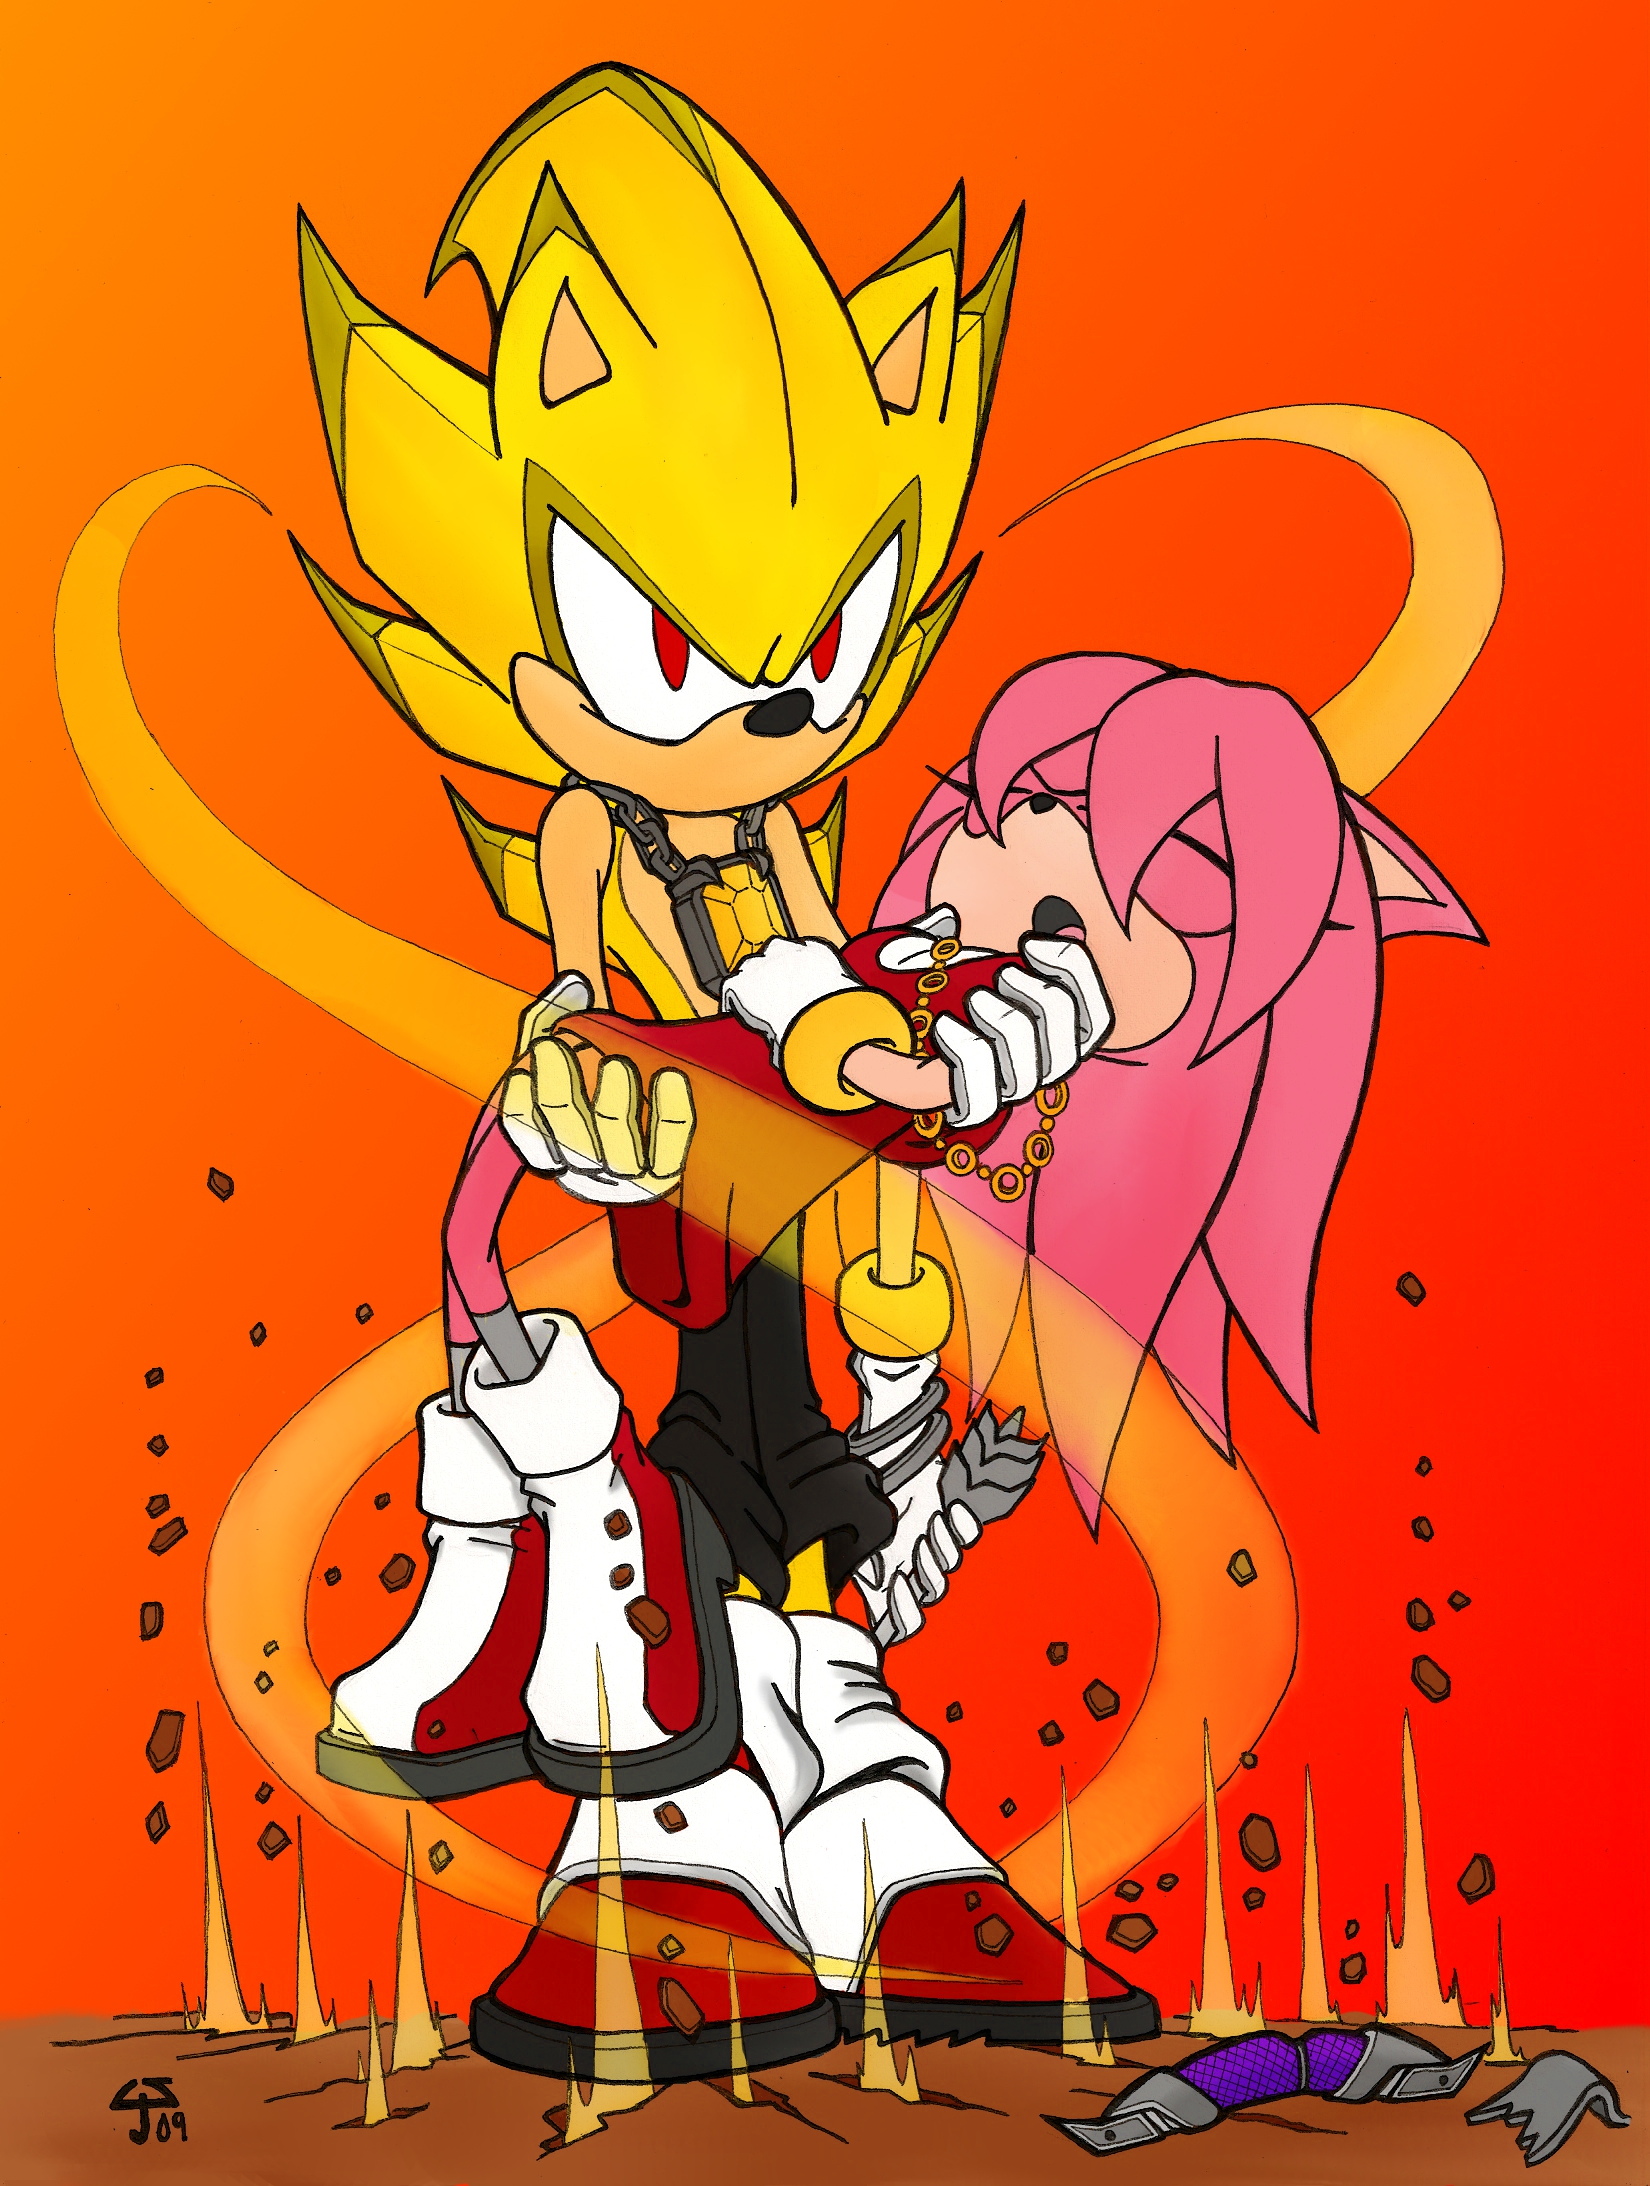 Sonic And Amy Retaliation Colored By Sonicwind 01 On Deviantart.